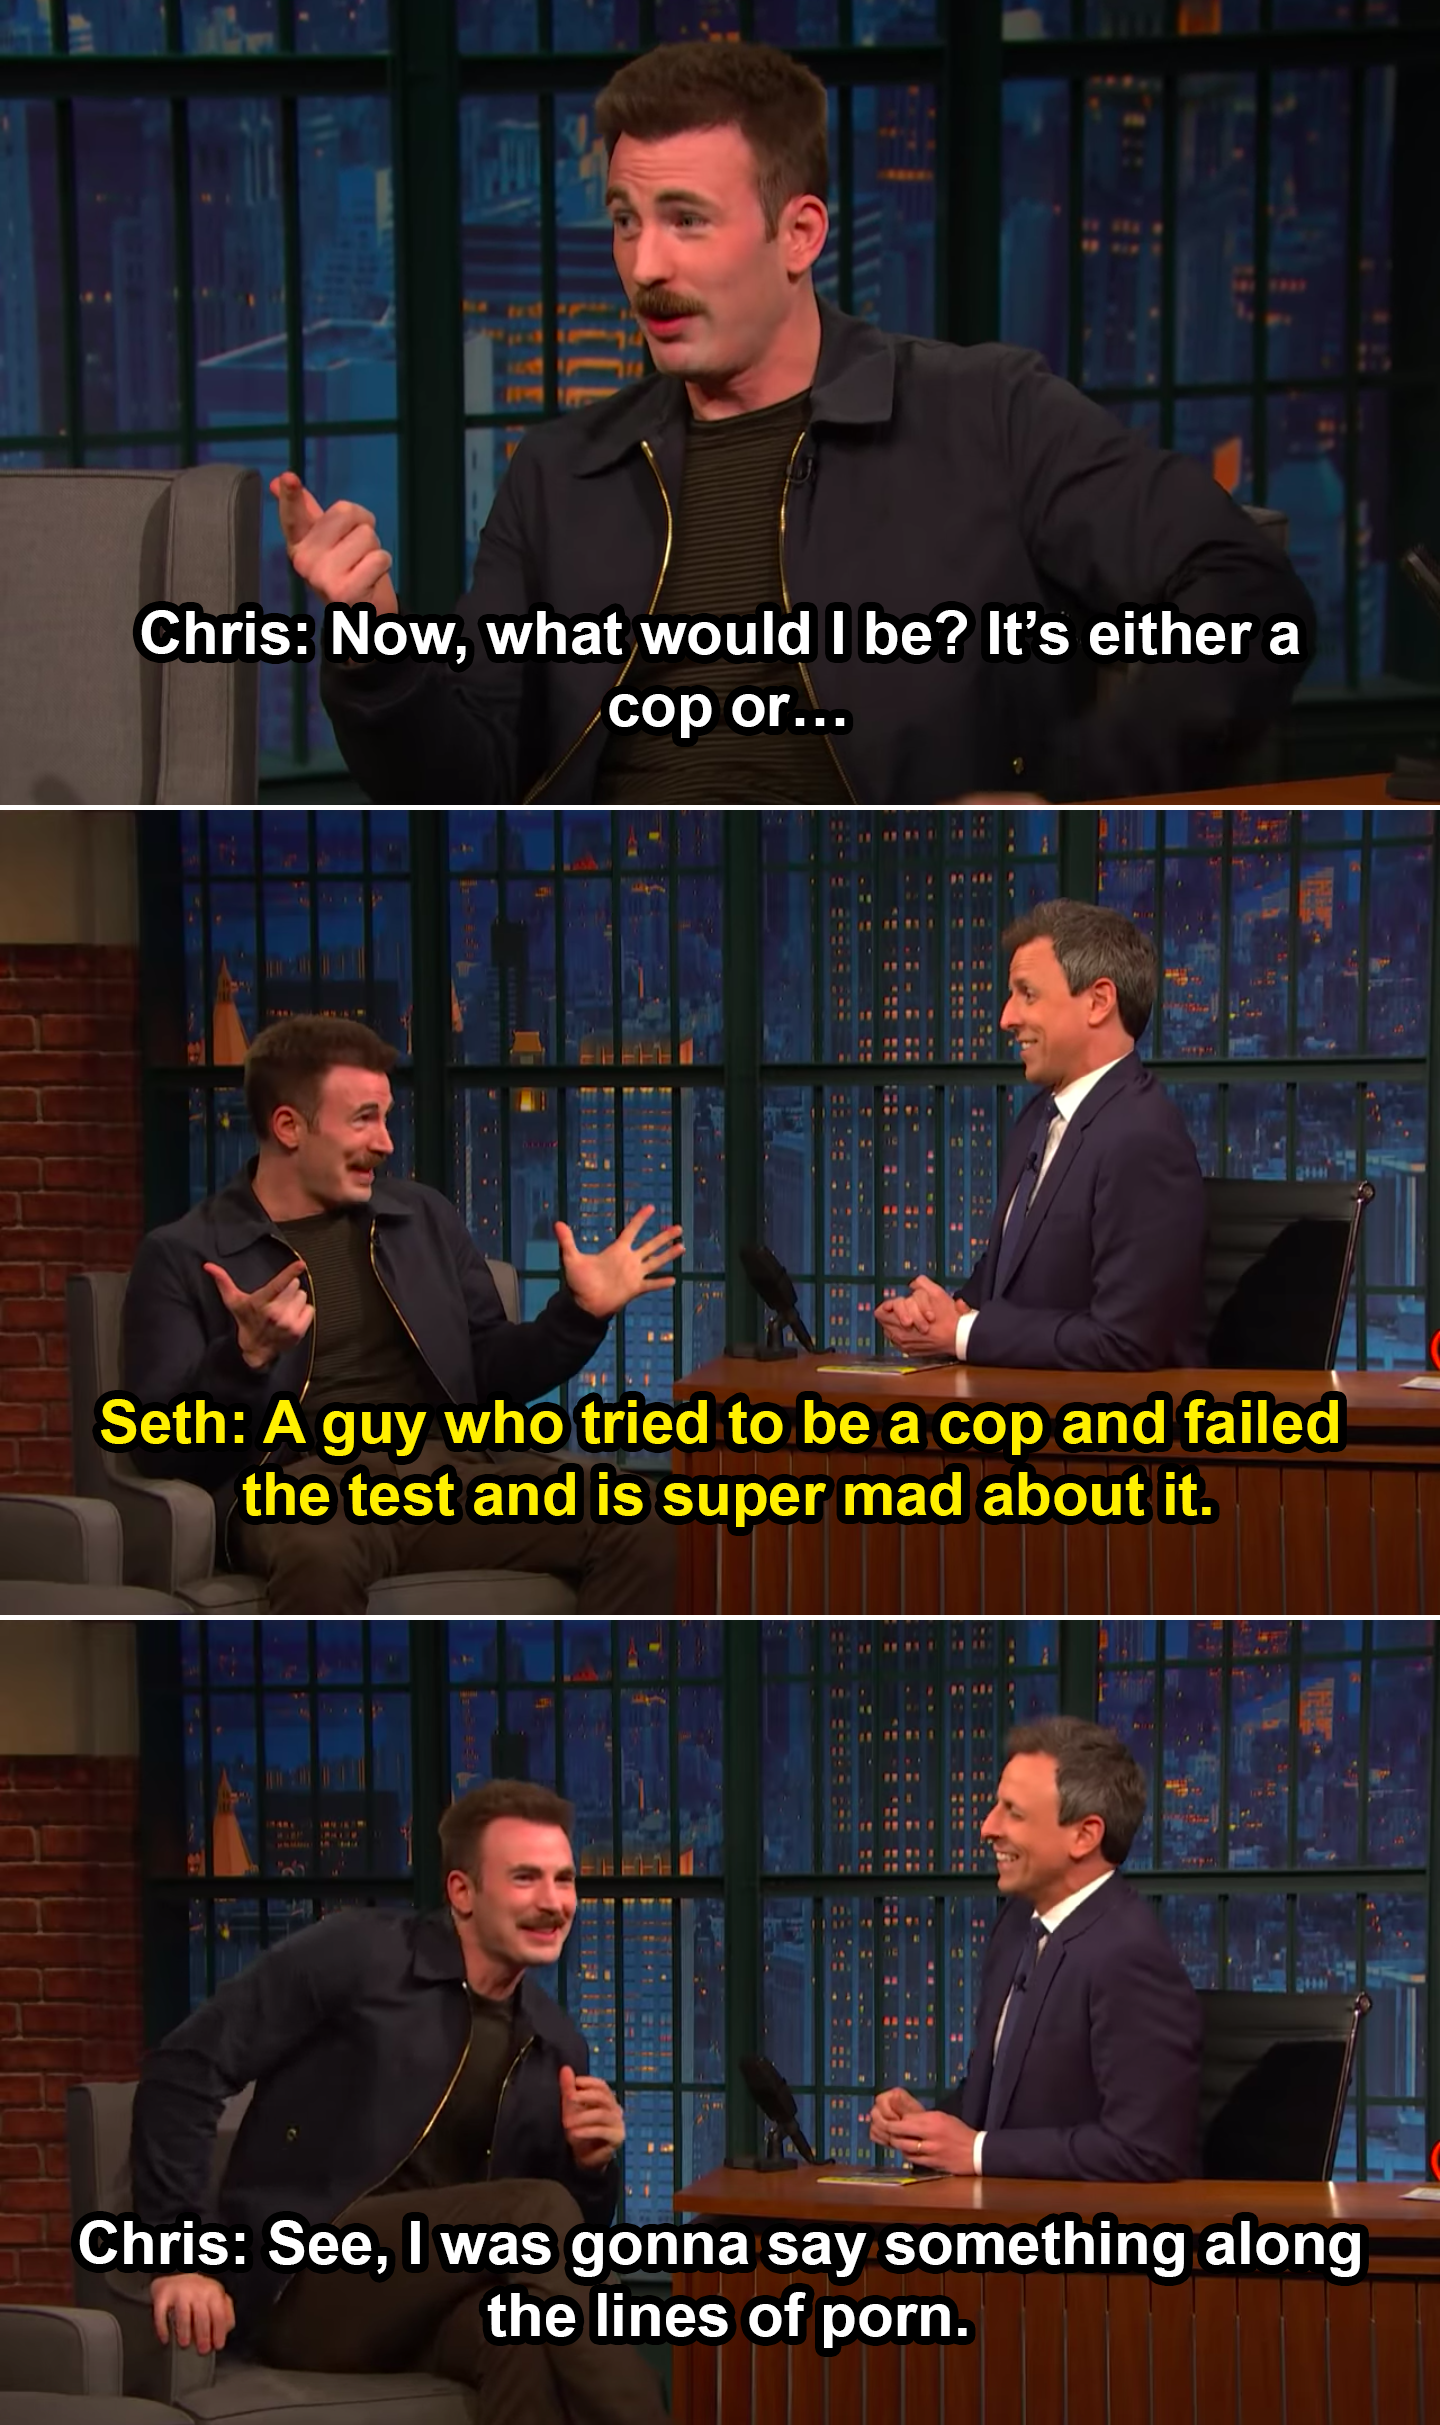 Chris: &quot;It&#x27;s either a cop or&quot; Seth: &quot;A guy who tried to be a cop and failed the test&quot; Chris: &quot;See, I was gonna say something along the lines of porn&quot;